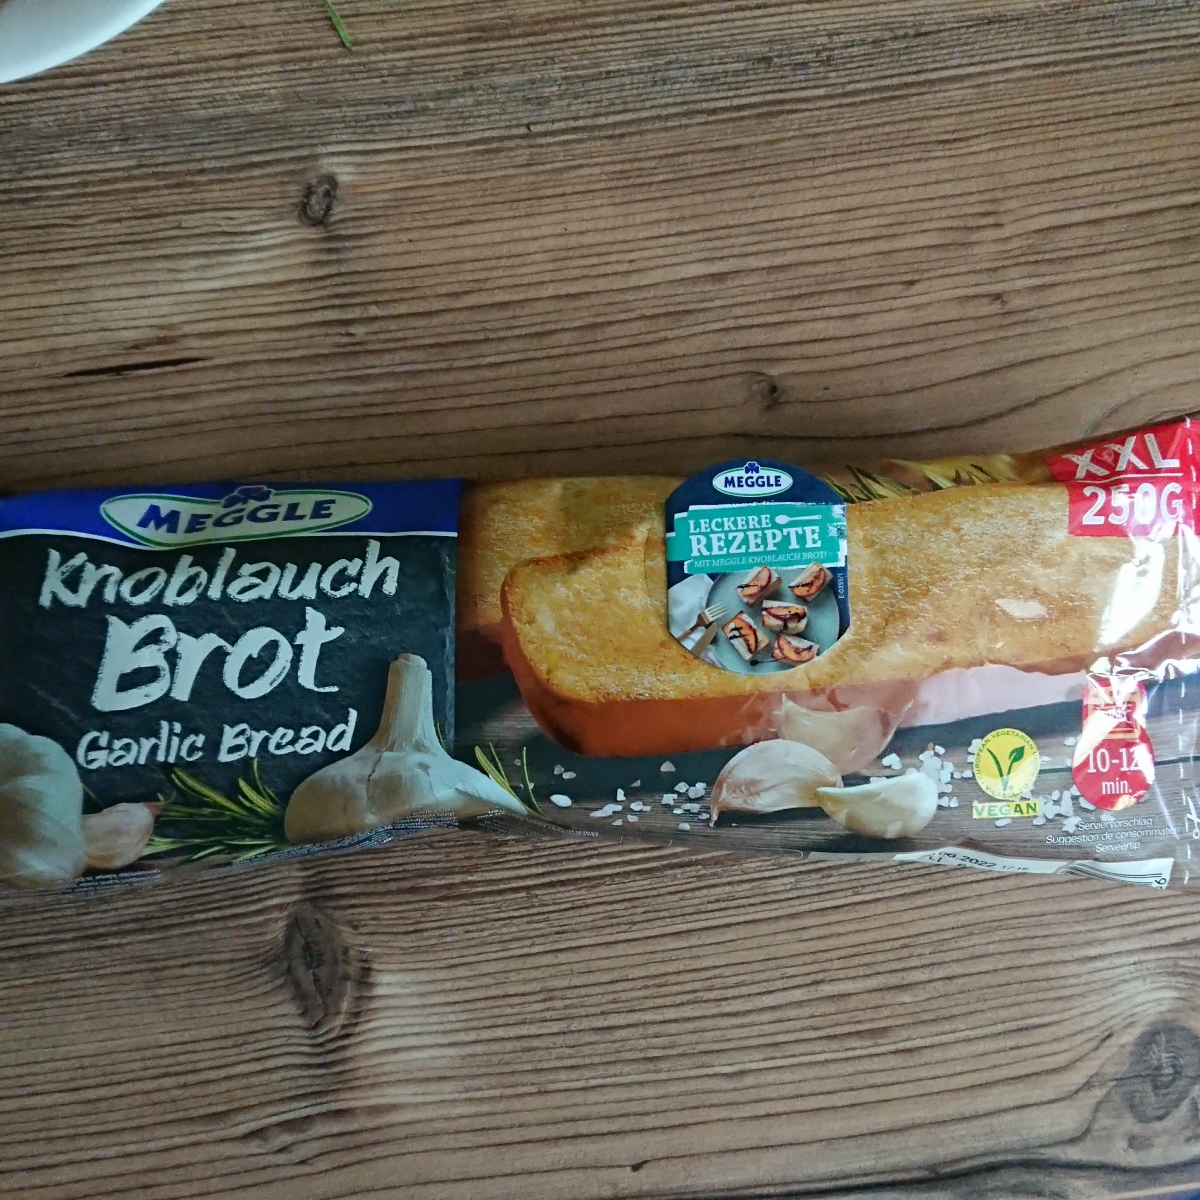 Meggle Knoblauch Brot abillion | Review